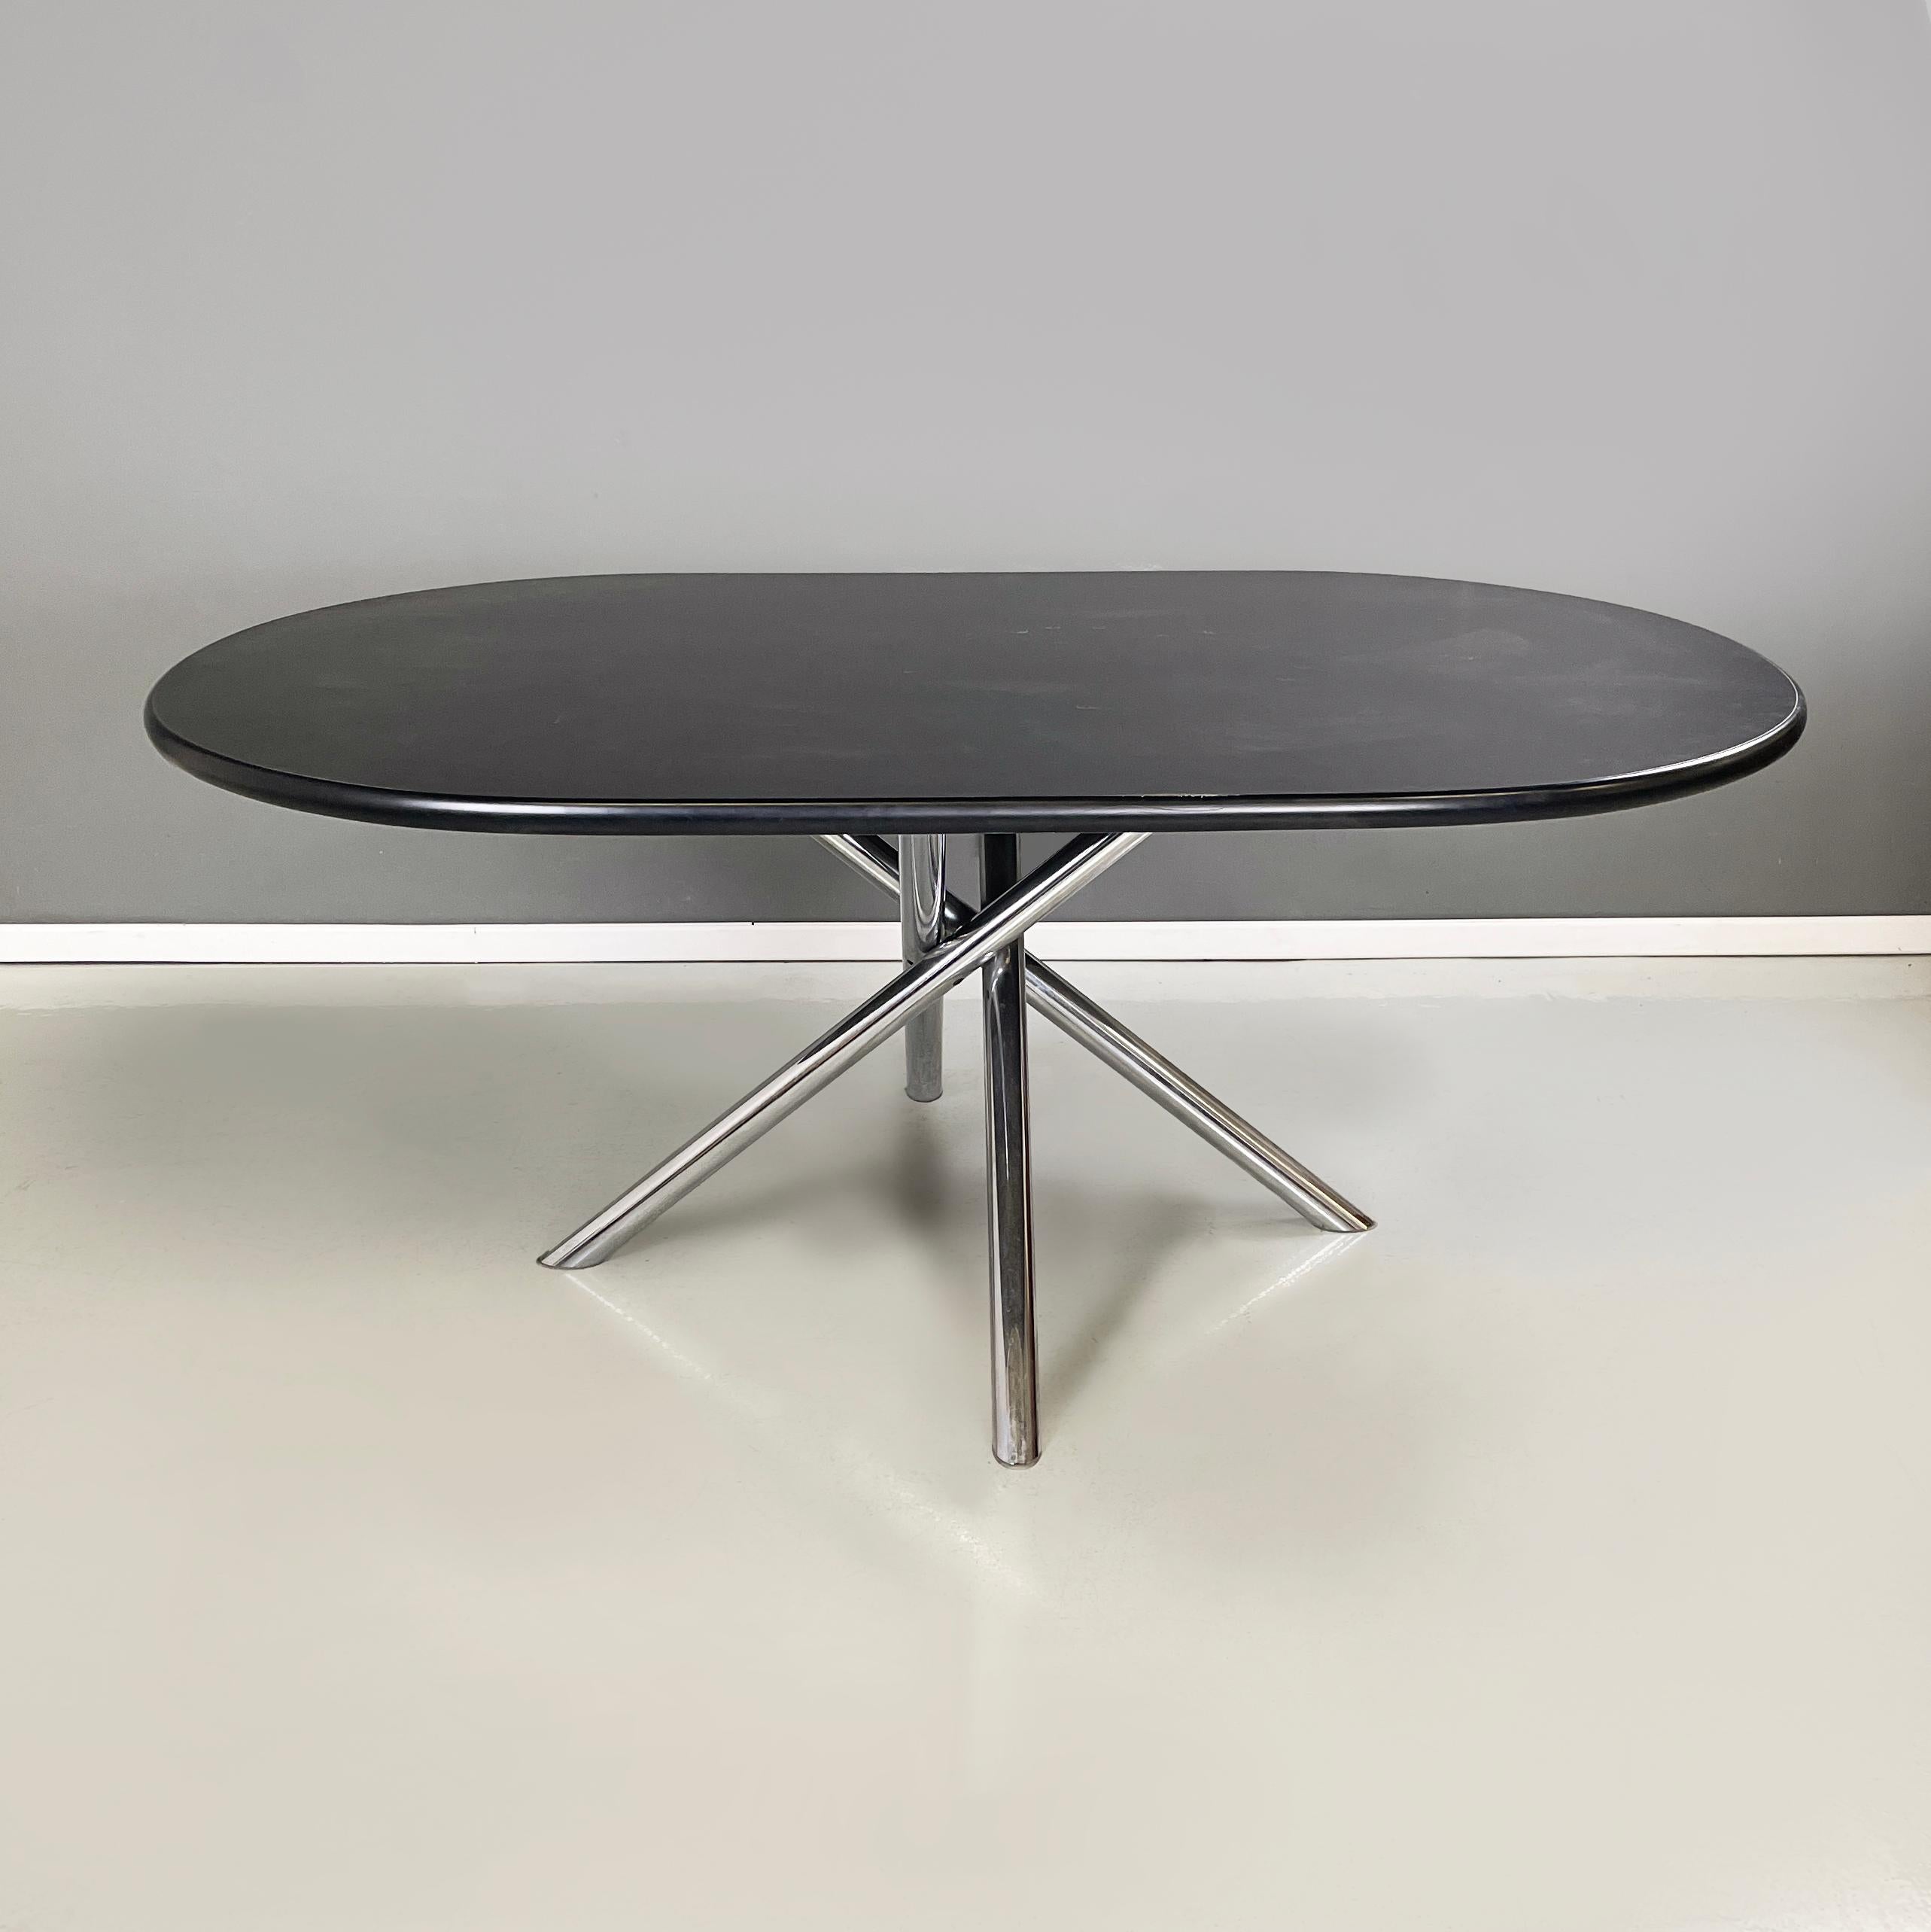 Italian Oval dining table Nodo by Carlo Bartoli for Tisettanta, 1970s
Dining table mod. Nodo with oval top in black painted wood and black rubber rounded profiles. The base is made up of a series of metal tubes that join together in the center and